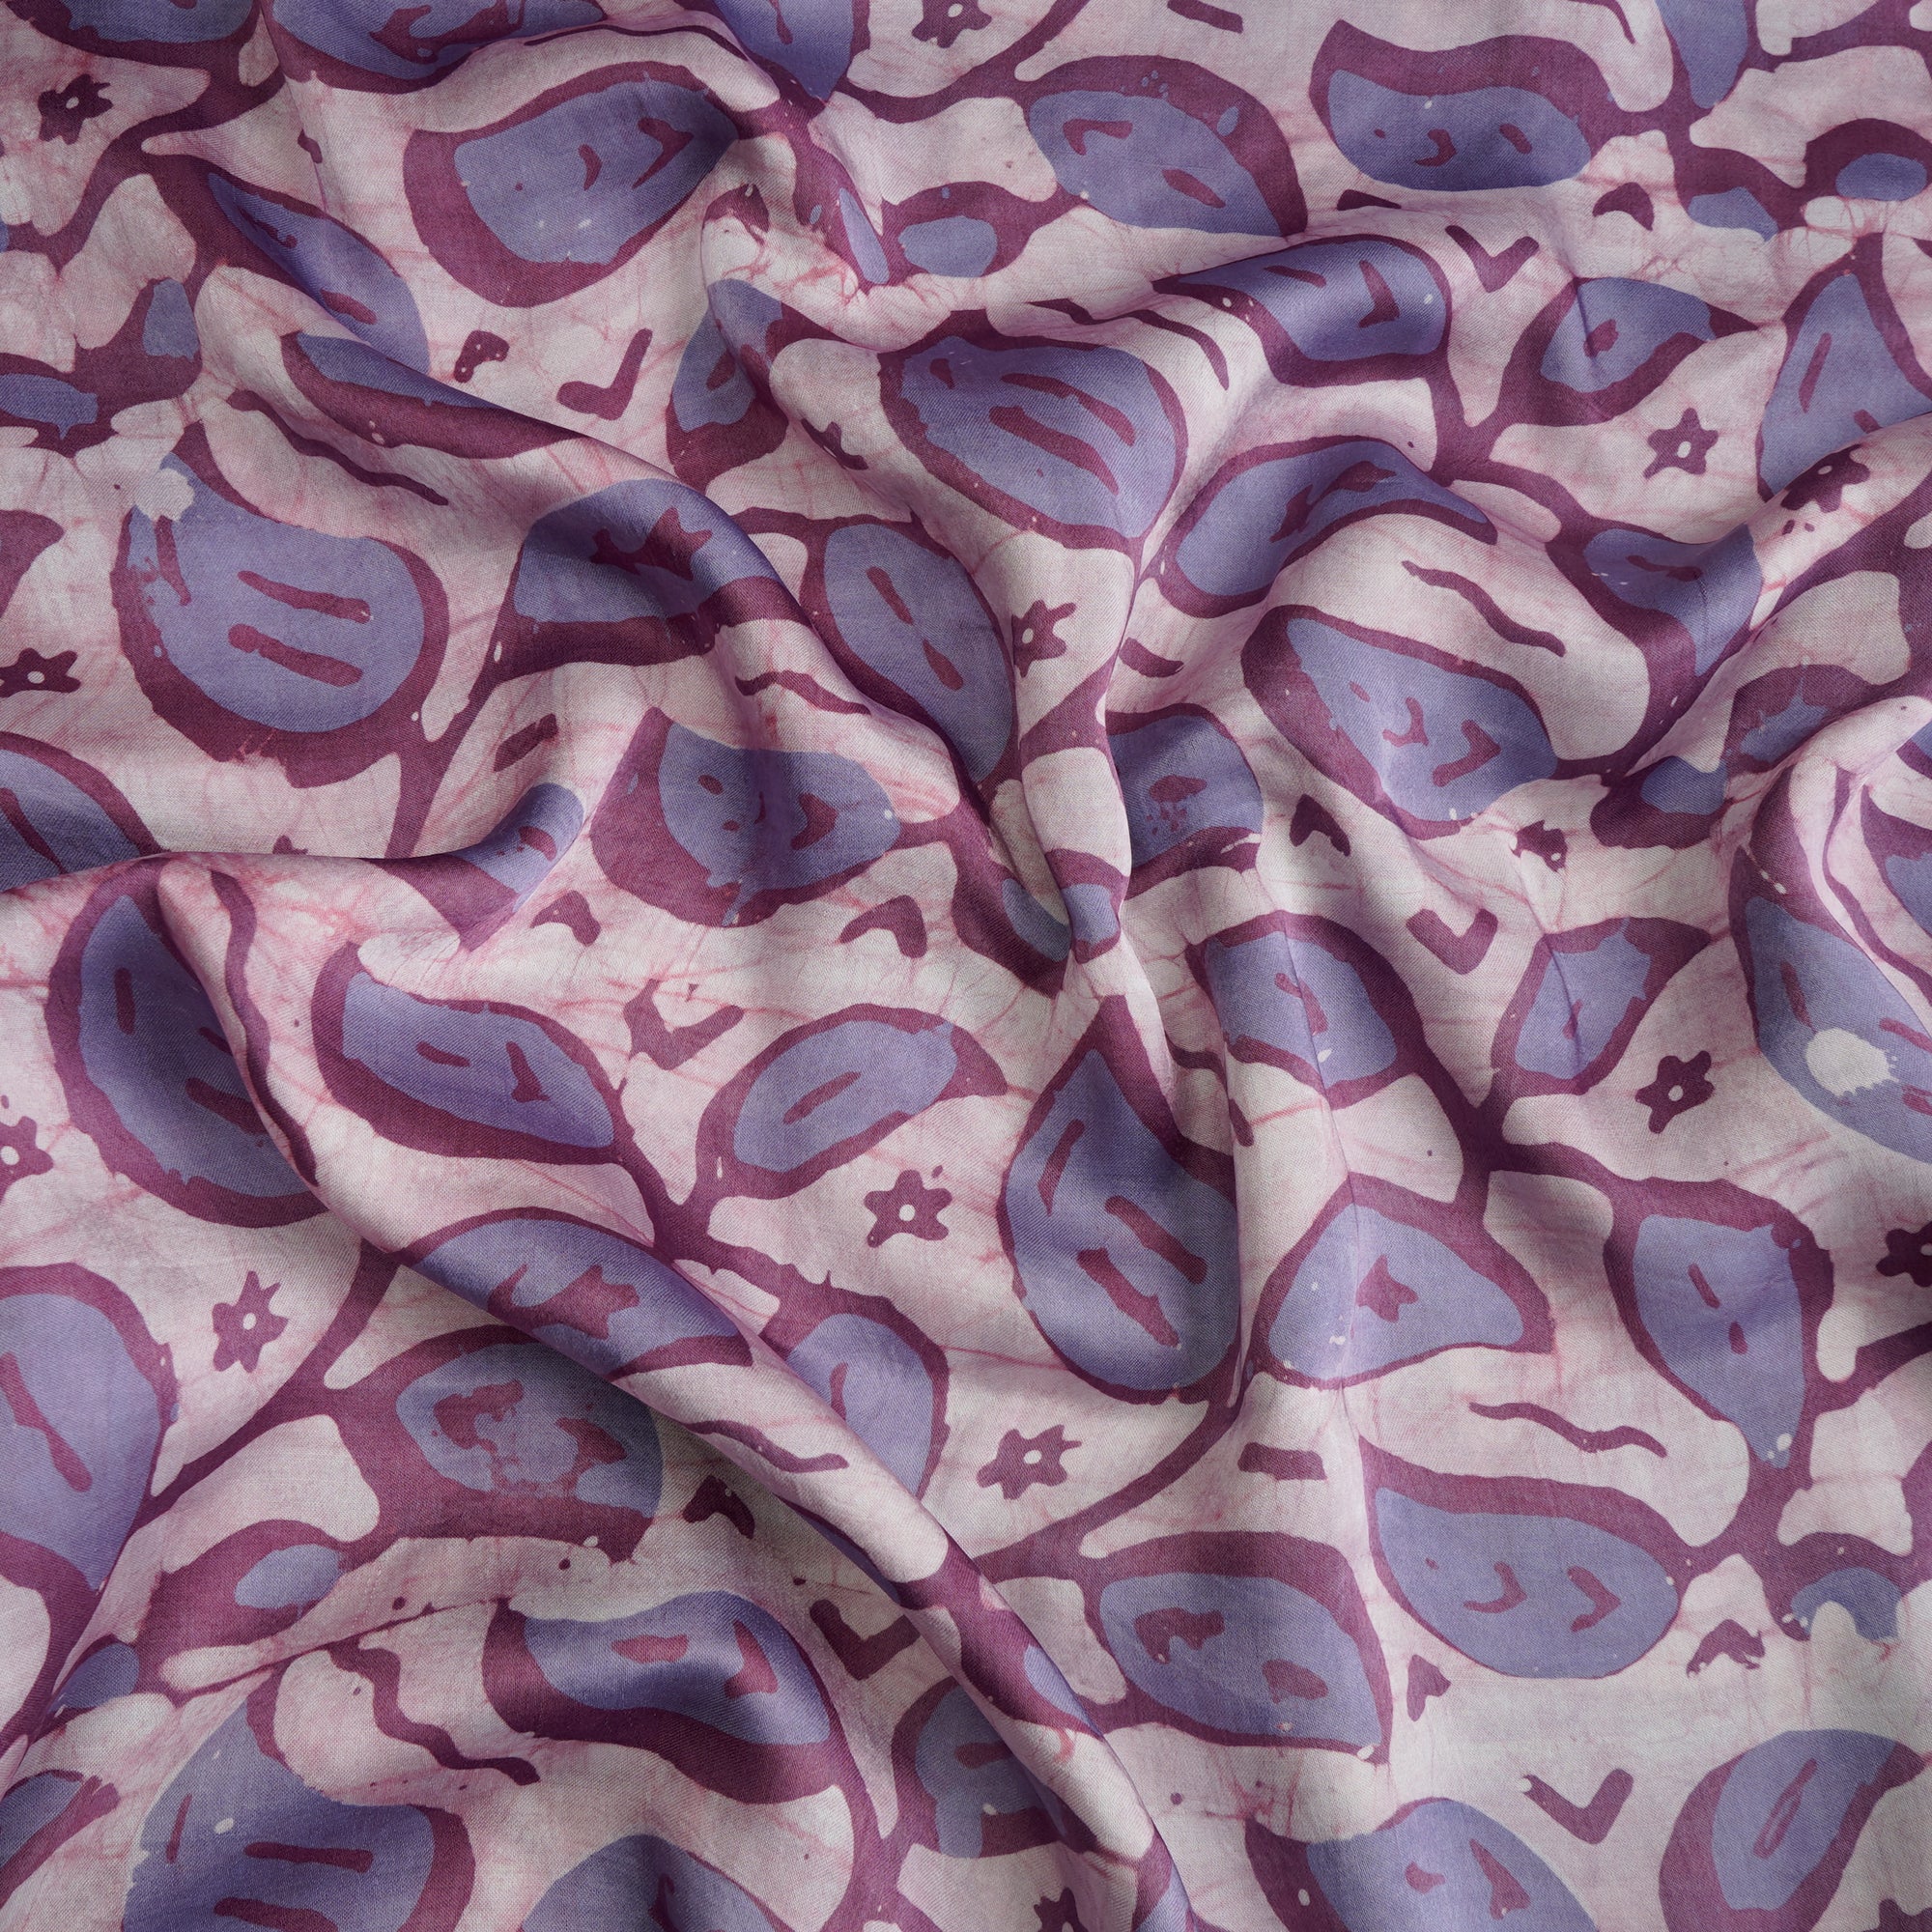 Lavender Handcrafted Waxed Batik Printed Modal Fabric